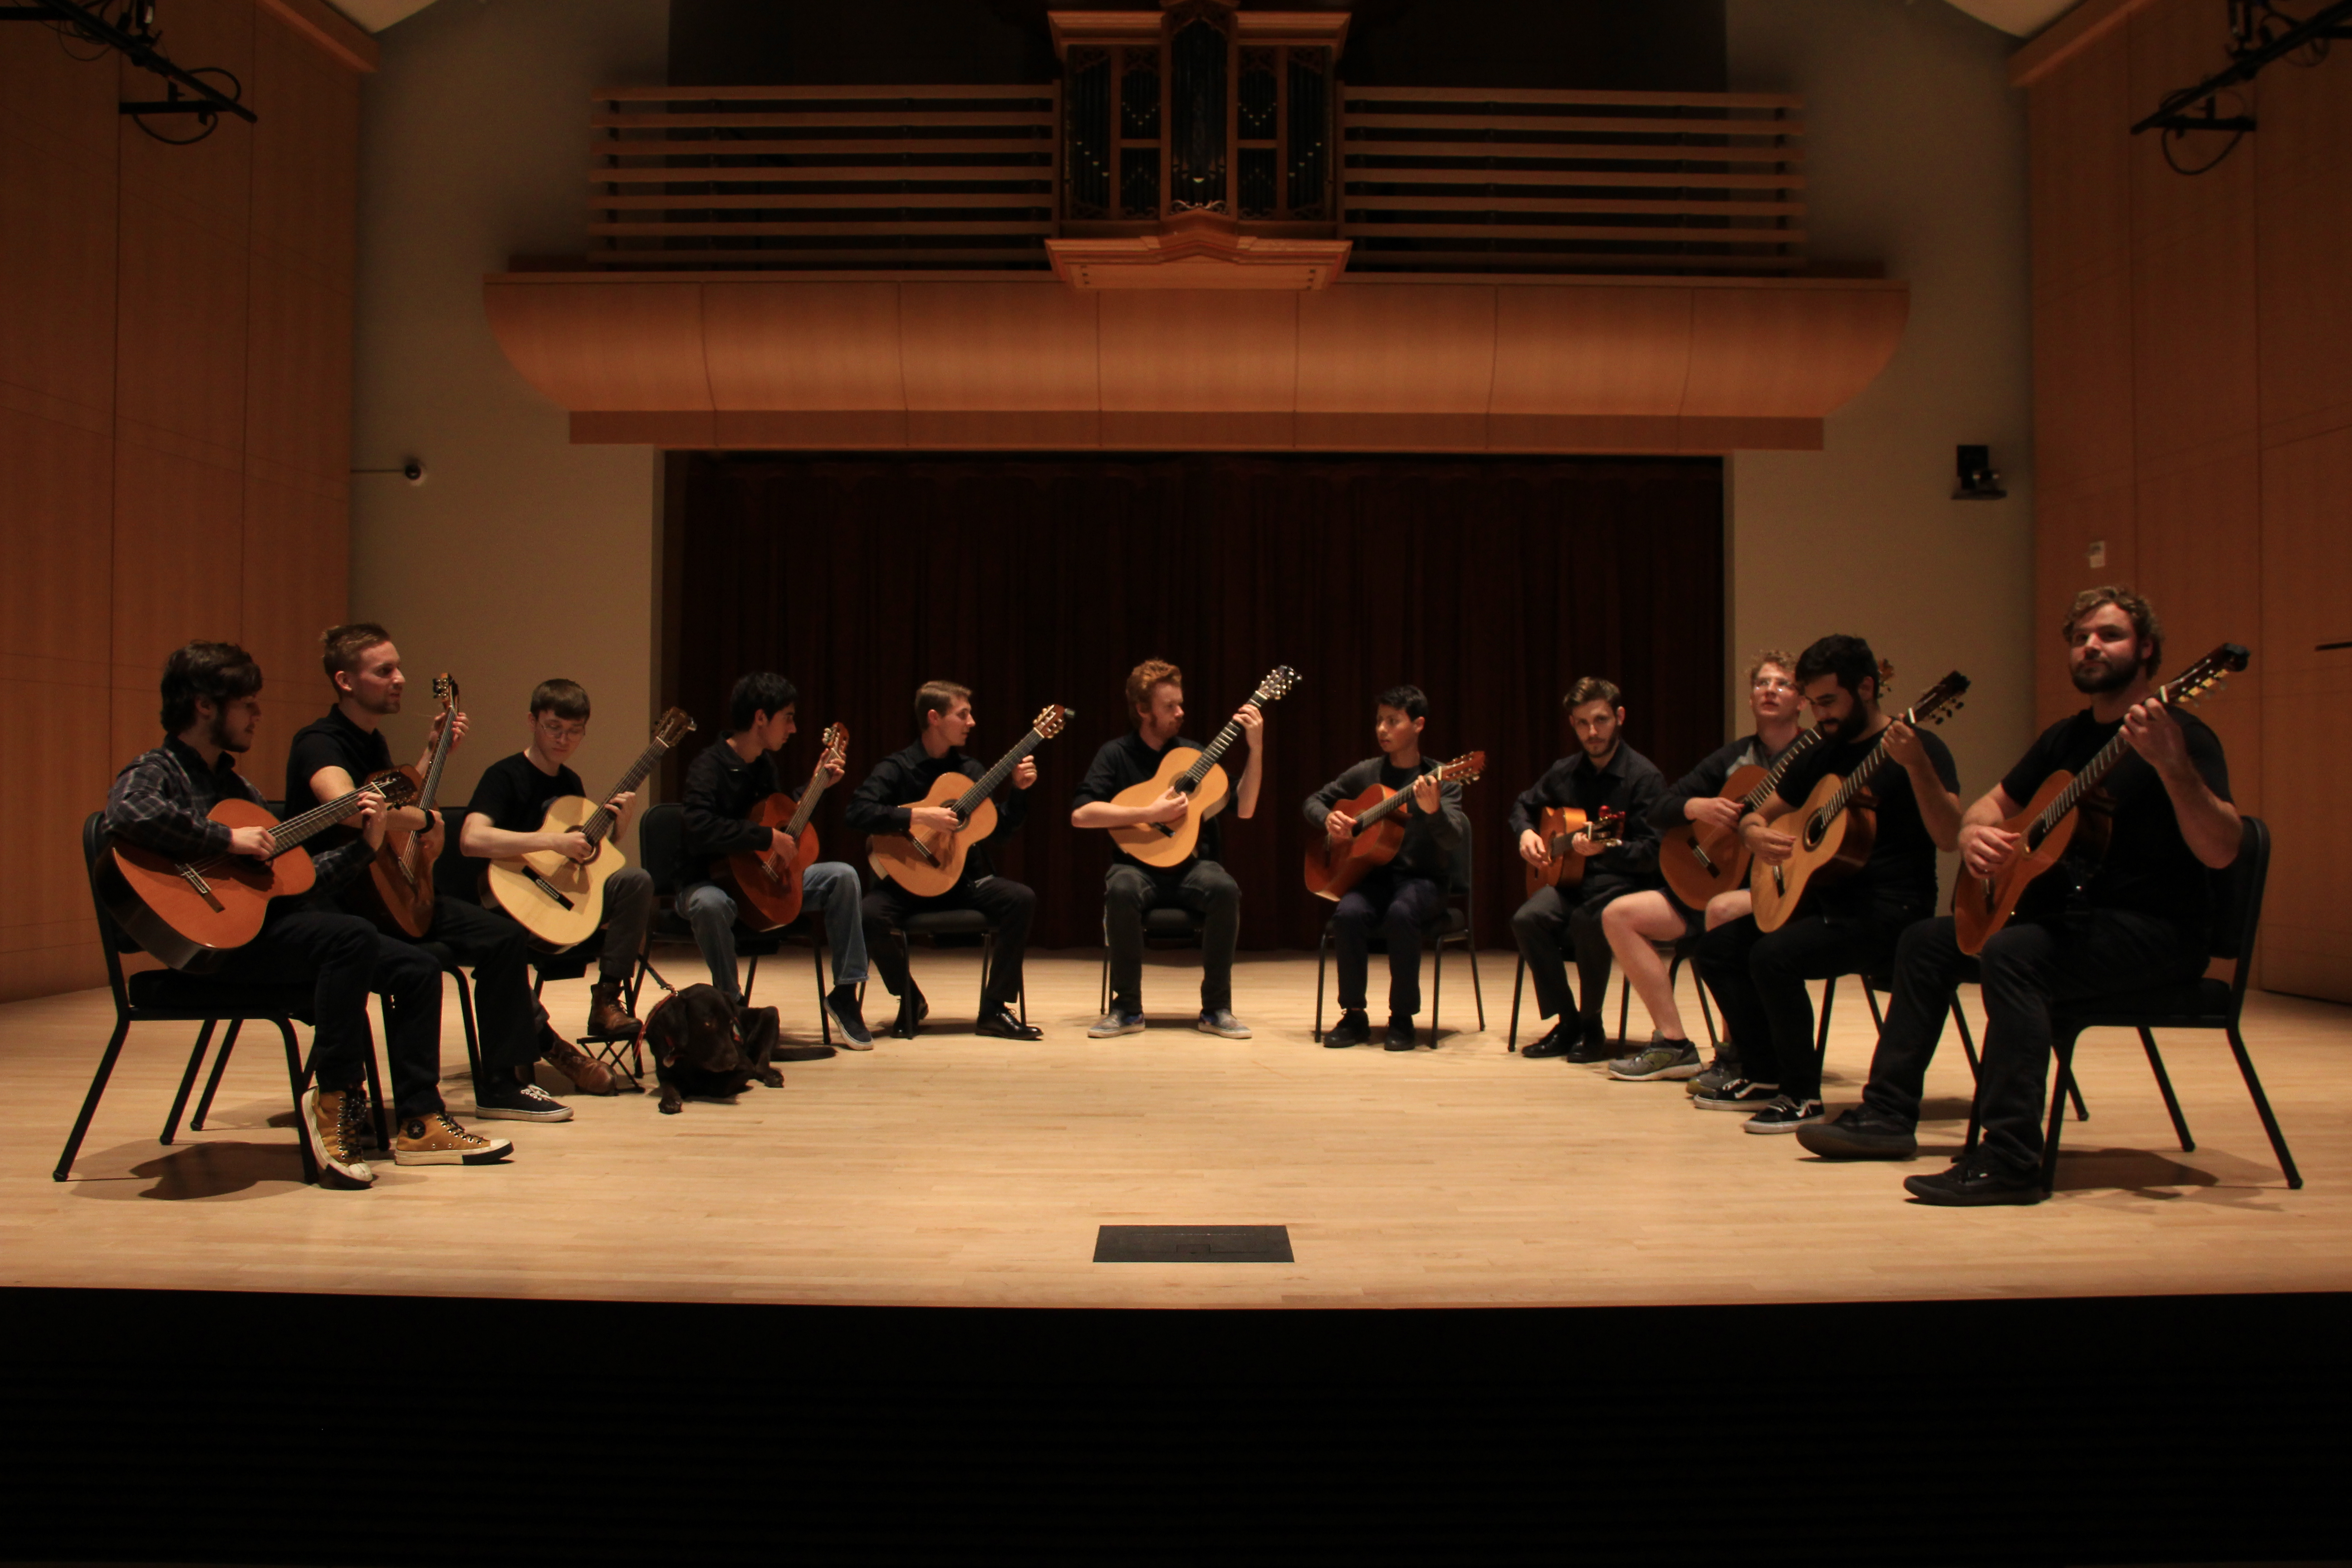 Guitar ensemble seated in a half circle on schroeder stage